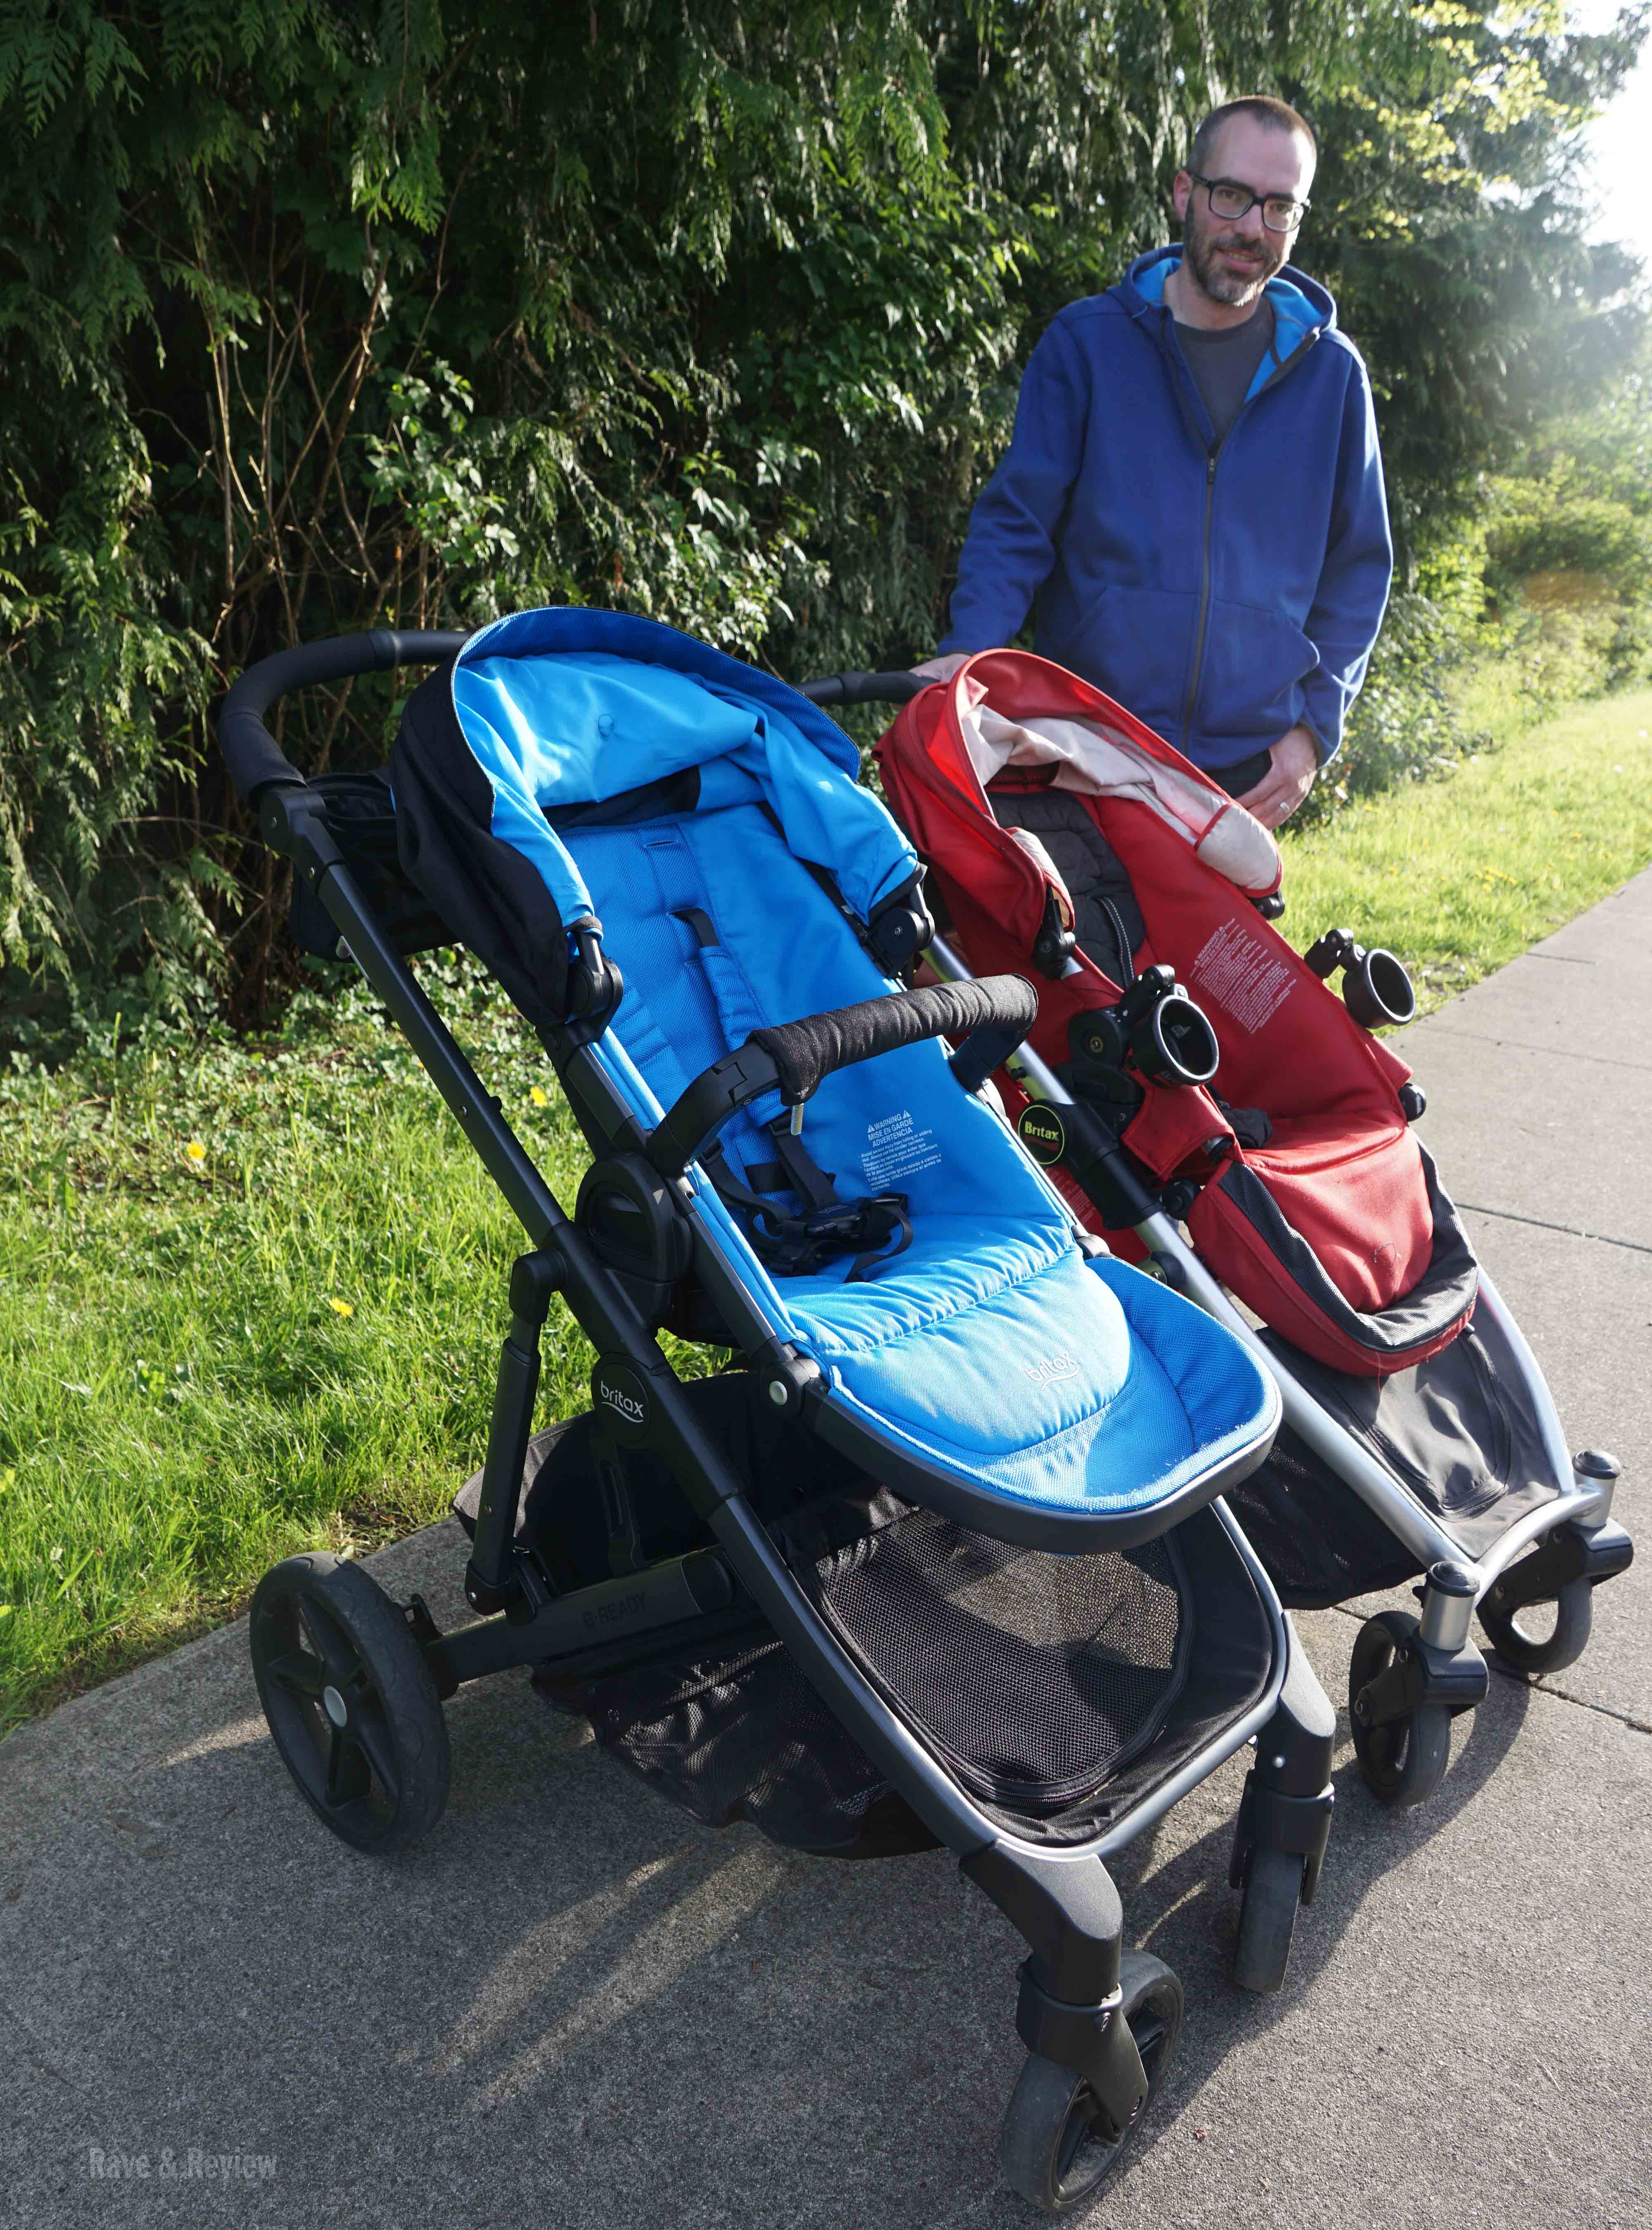 Changes to the 2017 Britax B-Ready stroller